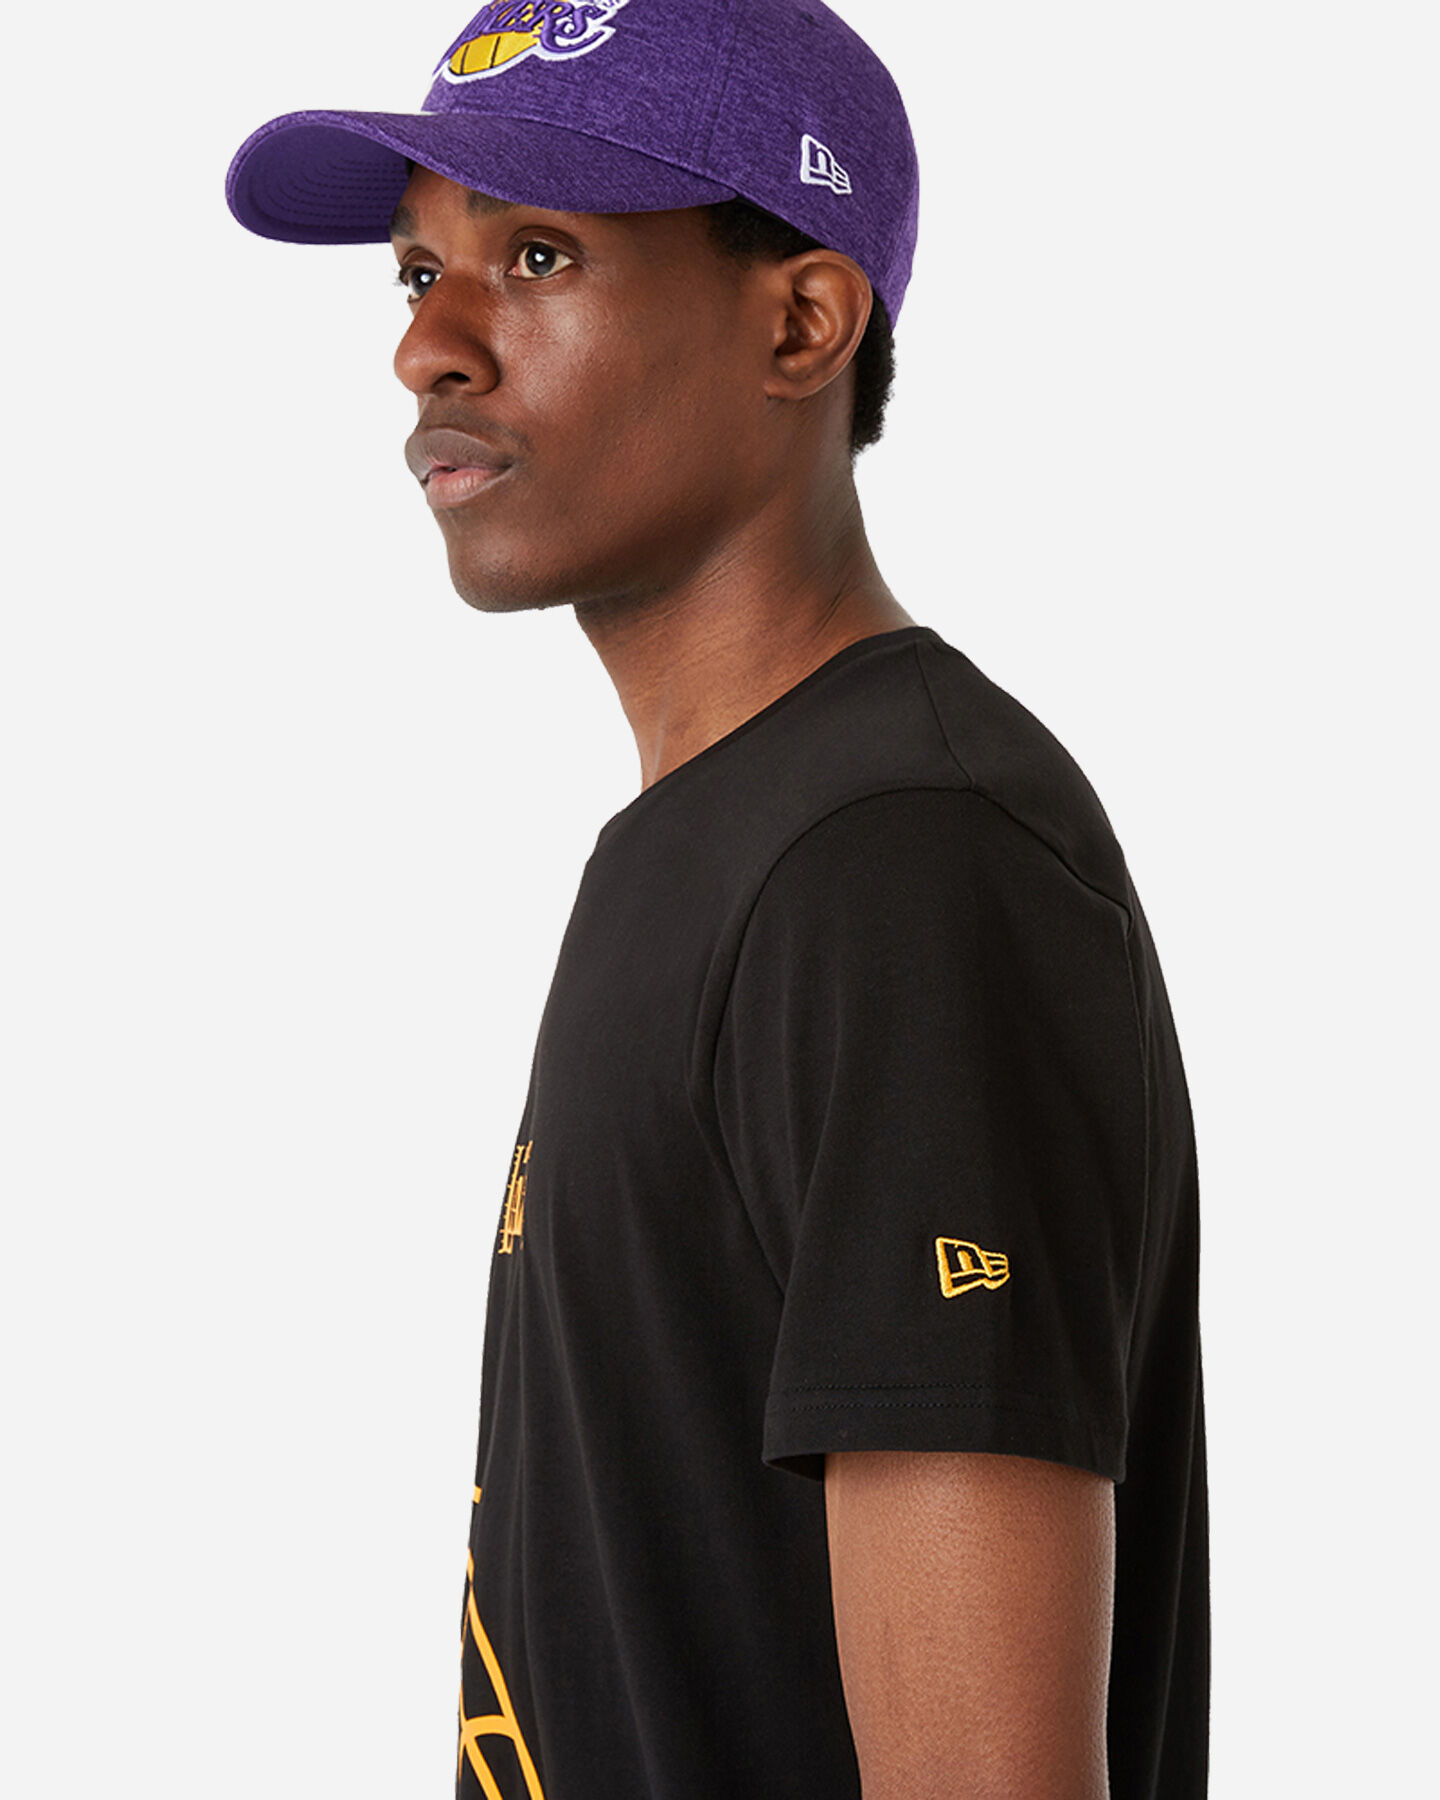  T-Shirt NEW ERA NBA ENLARGED LOGO LOS ANGELES LAKERS M S5340094|001|S scatto 1